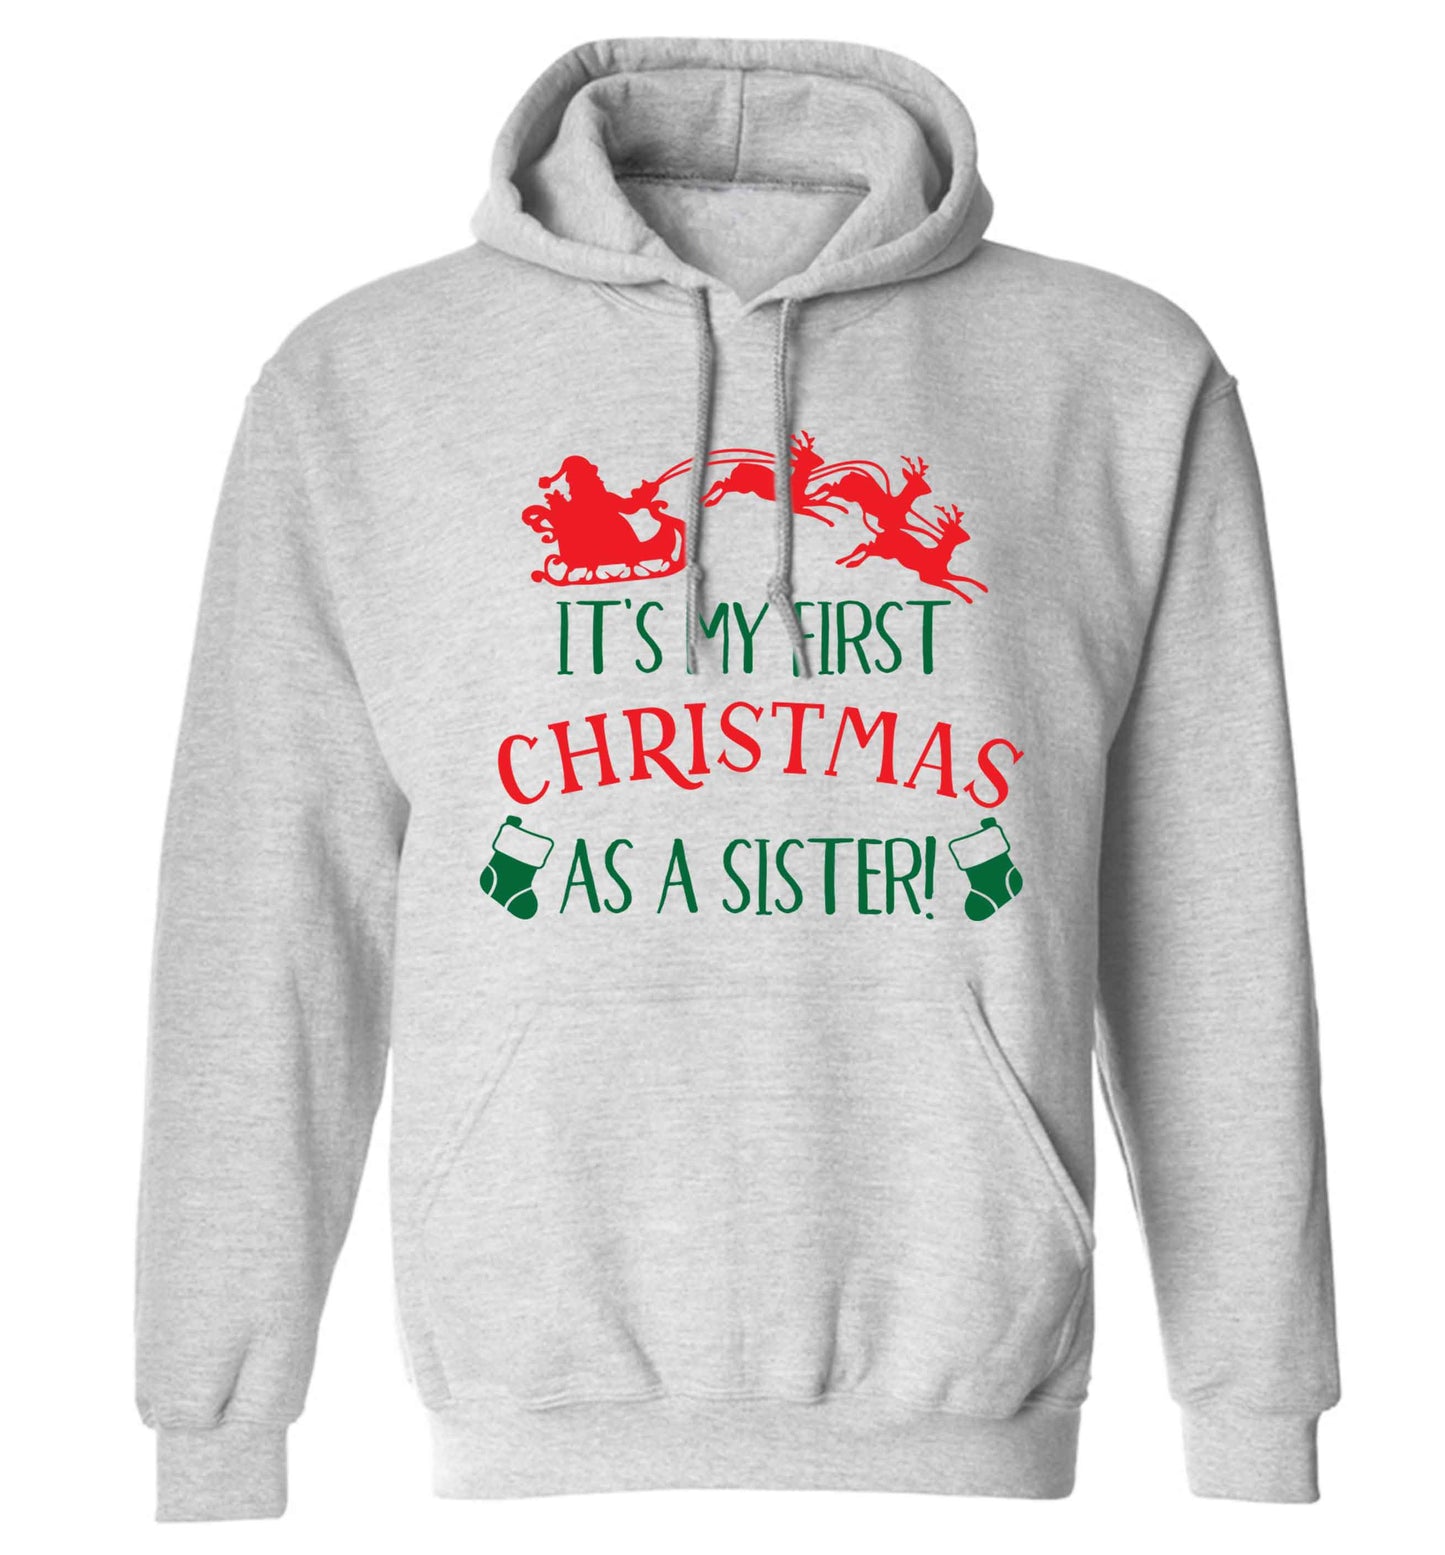 It's my first Christmas as a sister! adults unisex grey hoodie 2XL